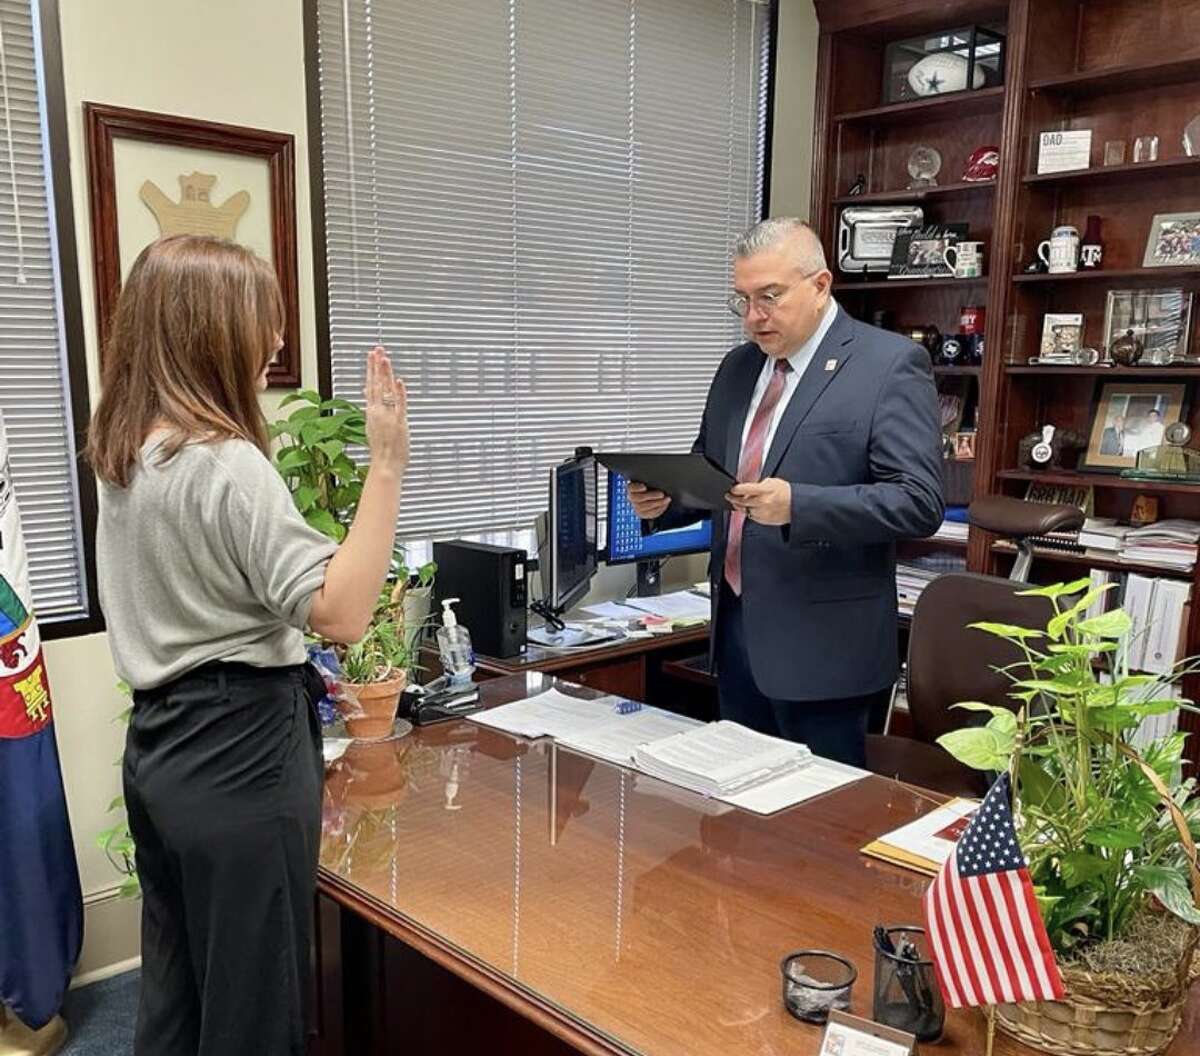 Dr. Melissa Martin, a family medicine physician, was recently nominated by City of Laredo Council Member for District 6 Dr. Tyler King to lead the Laredo Commission for Women and took the oath of office for the commission on Monday evening.